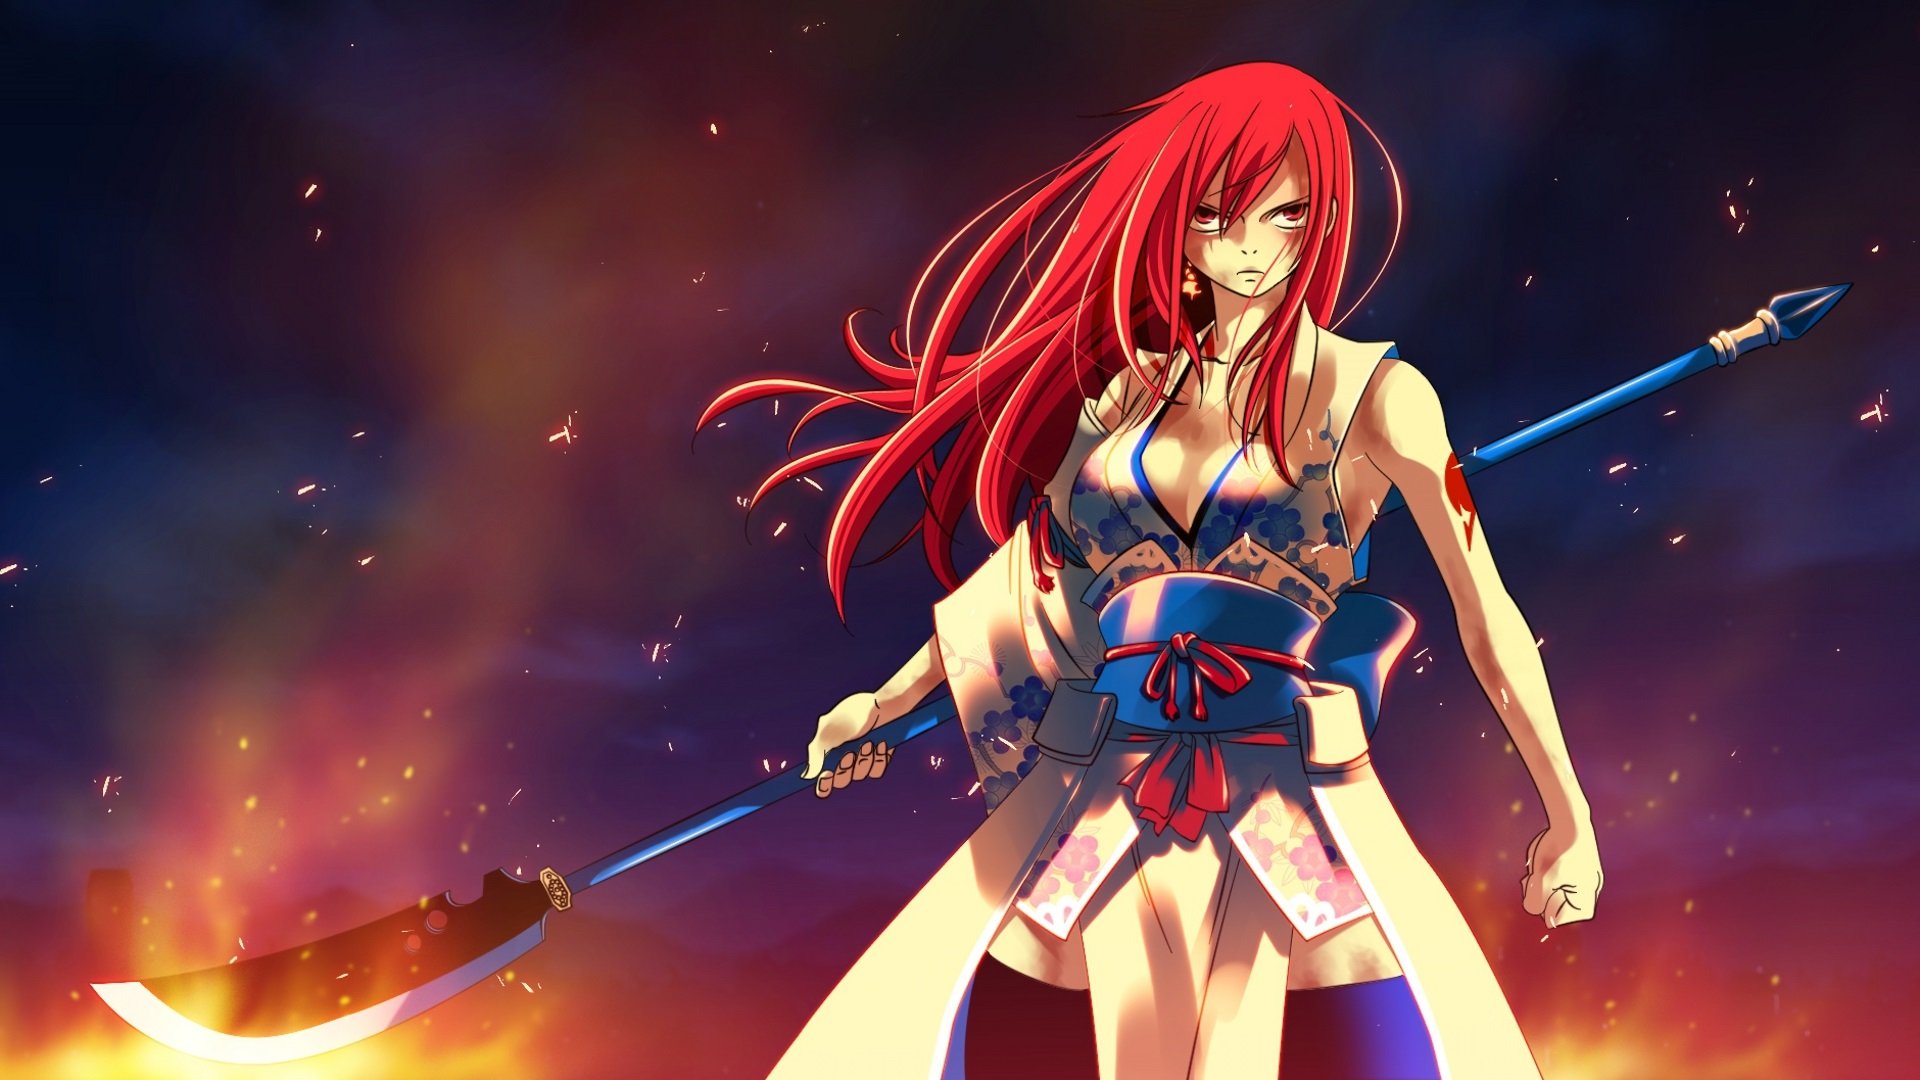 Download full hd 1080p Erza Scarlet PC background ID:40929 for free